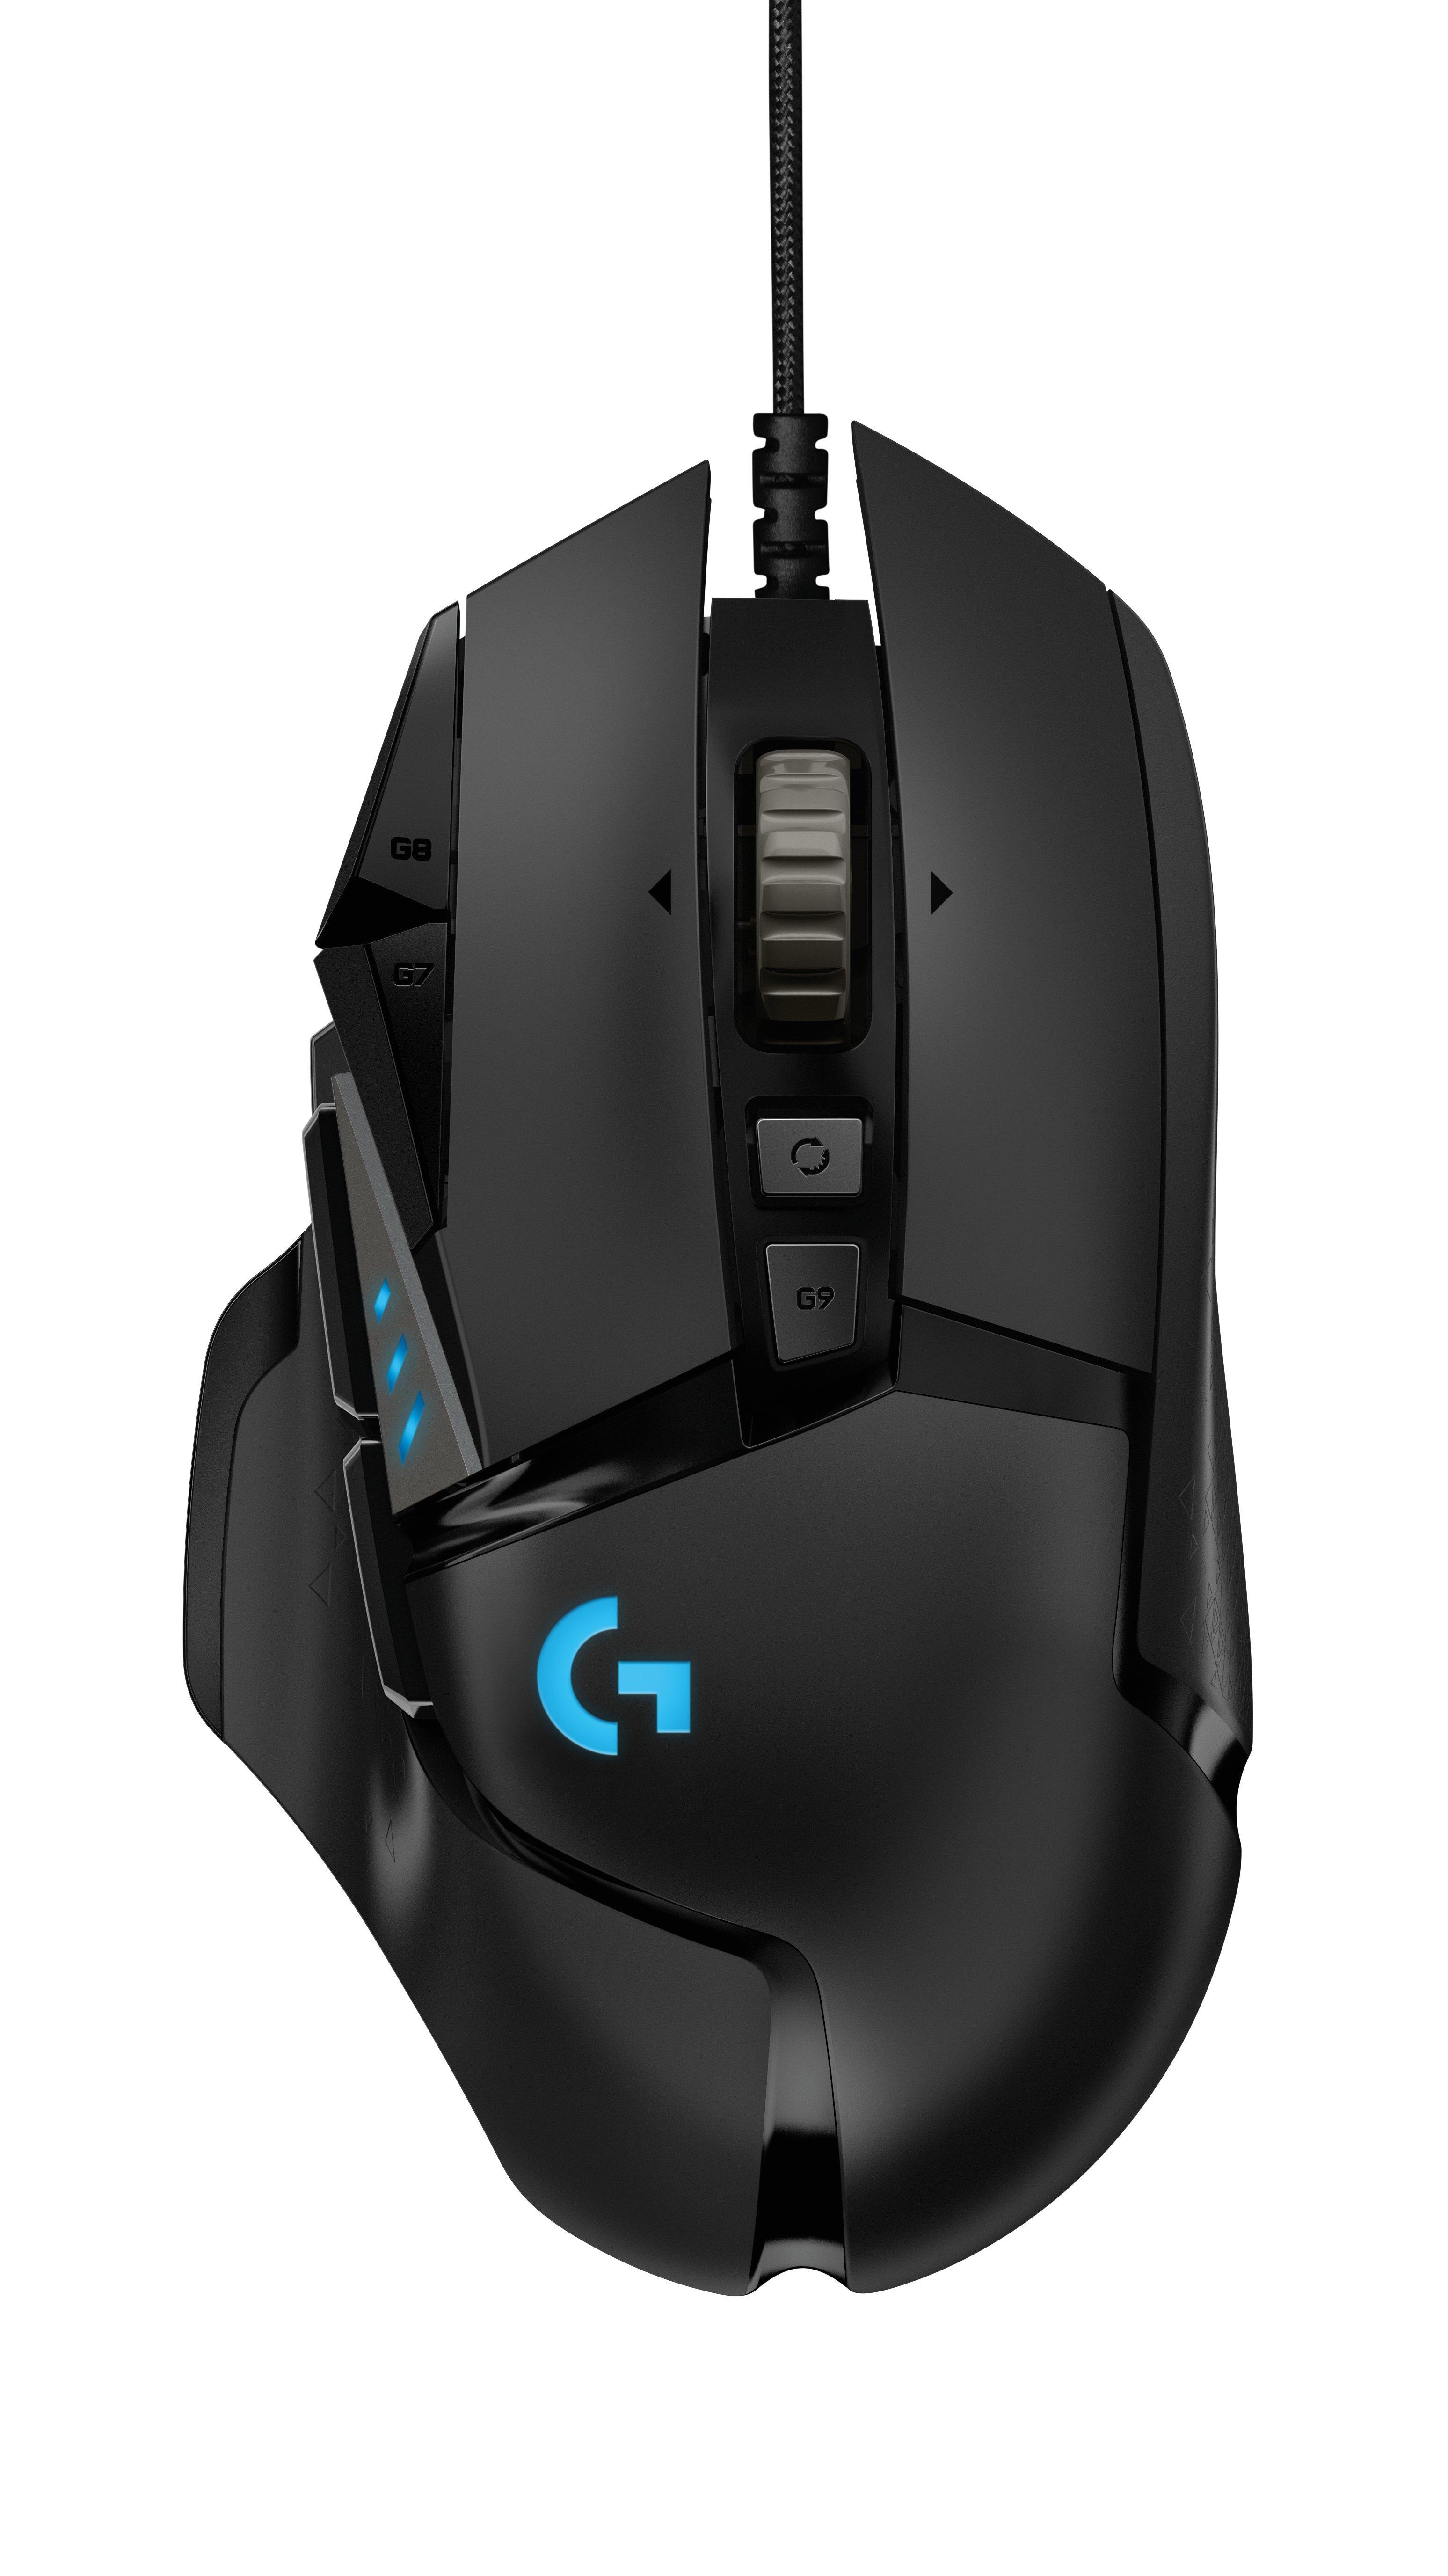 Logitech G502 HERO Wired Gaming Mouse |